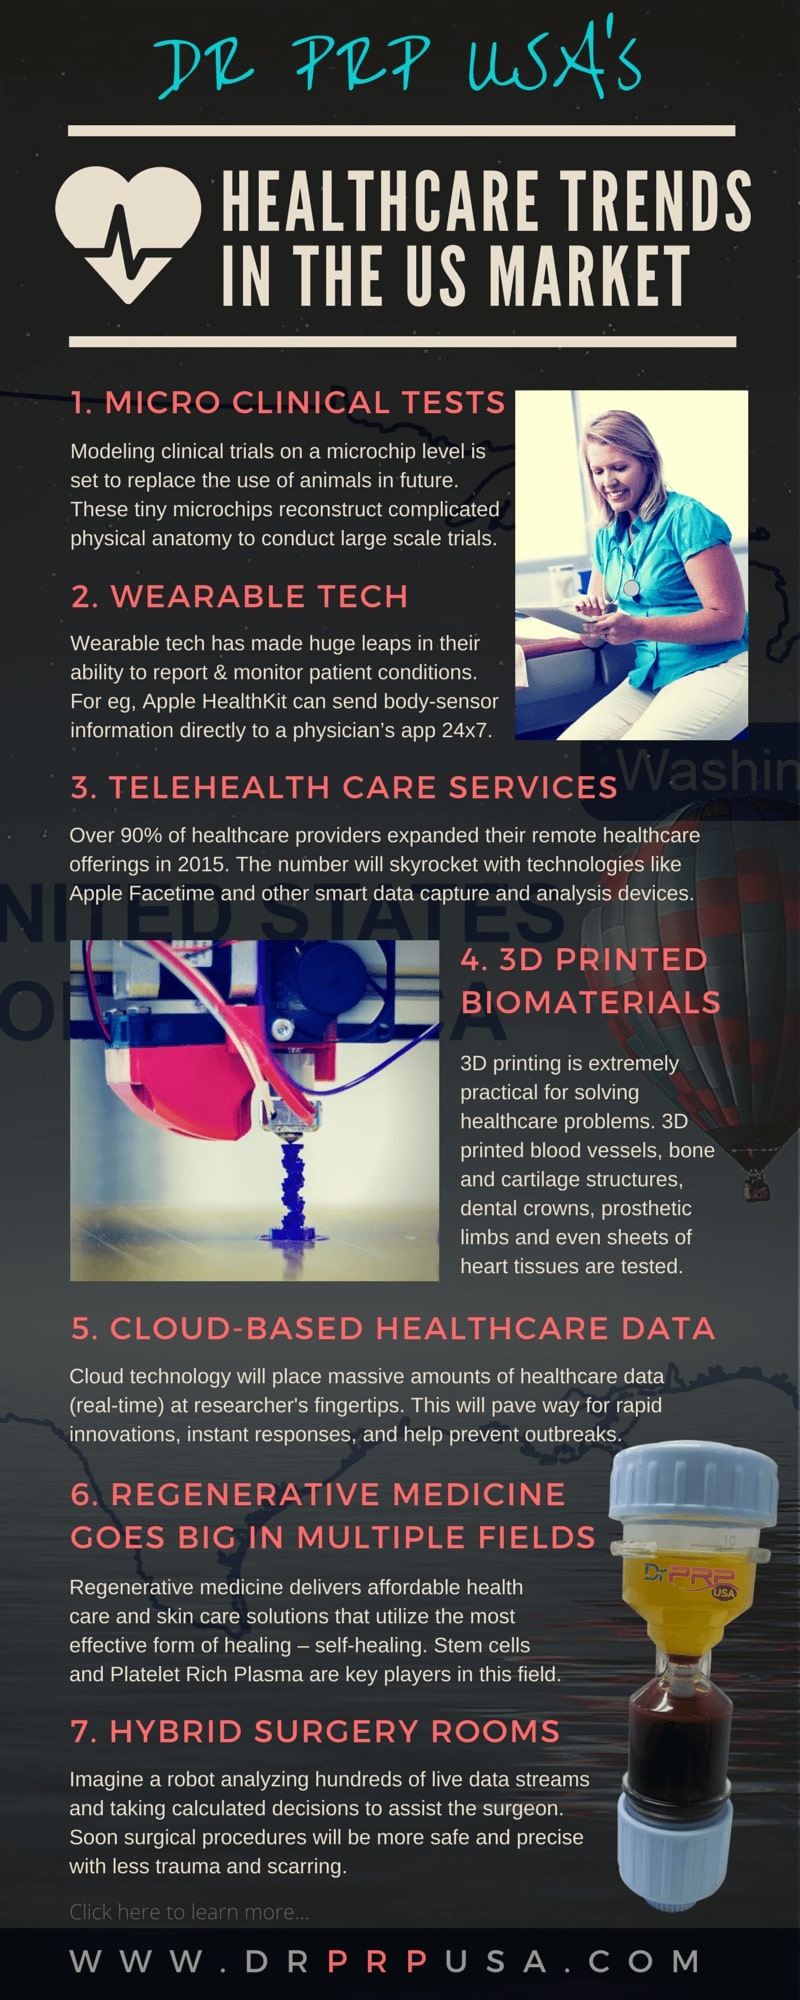 7 Biggest Healthcare Trends In The US [INFOGRAPHIC]